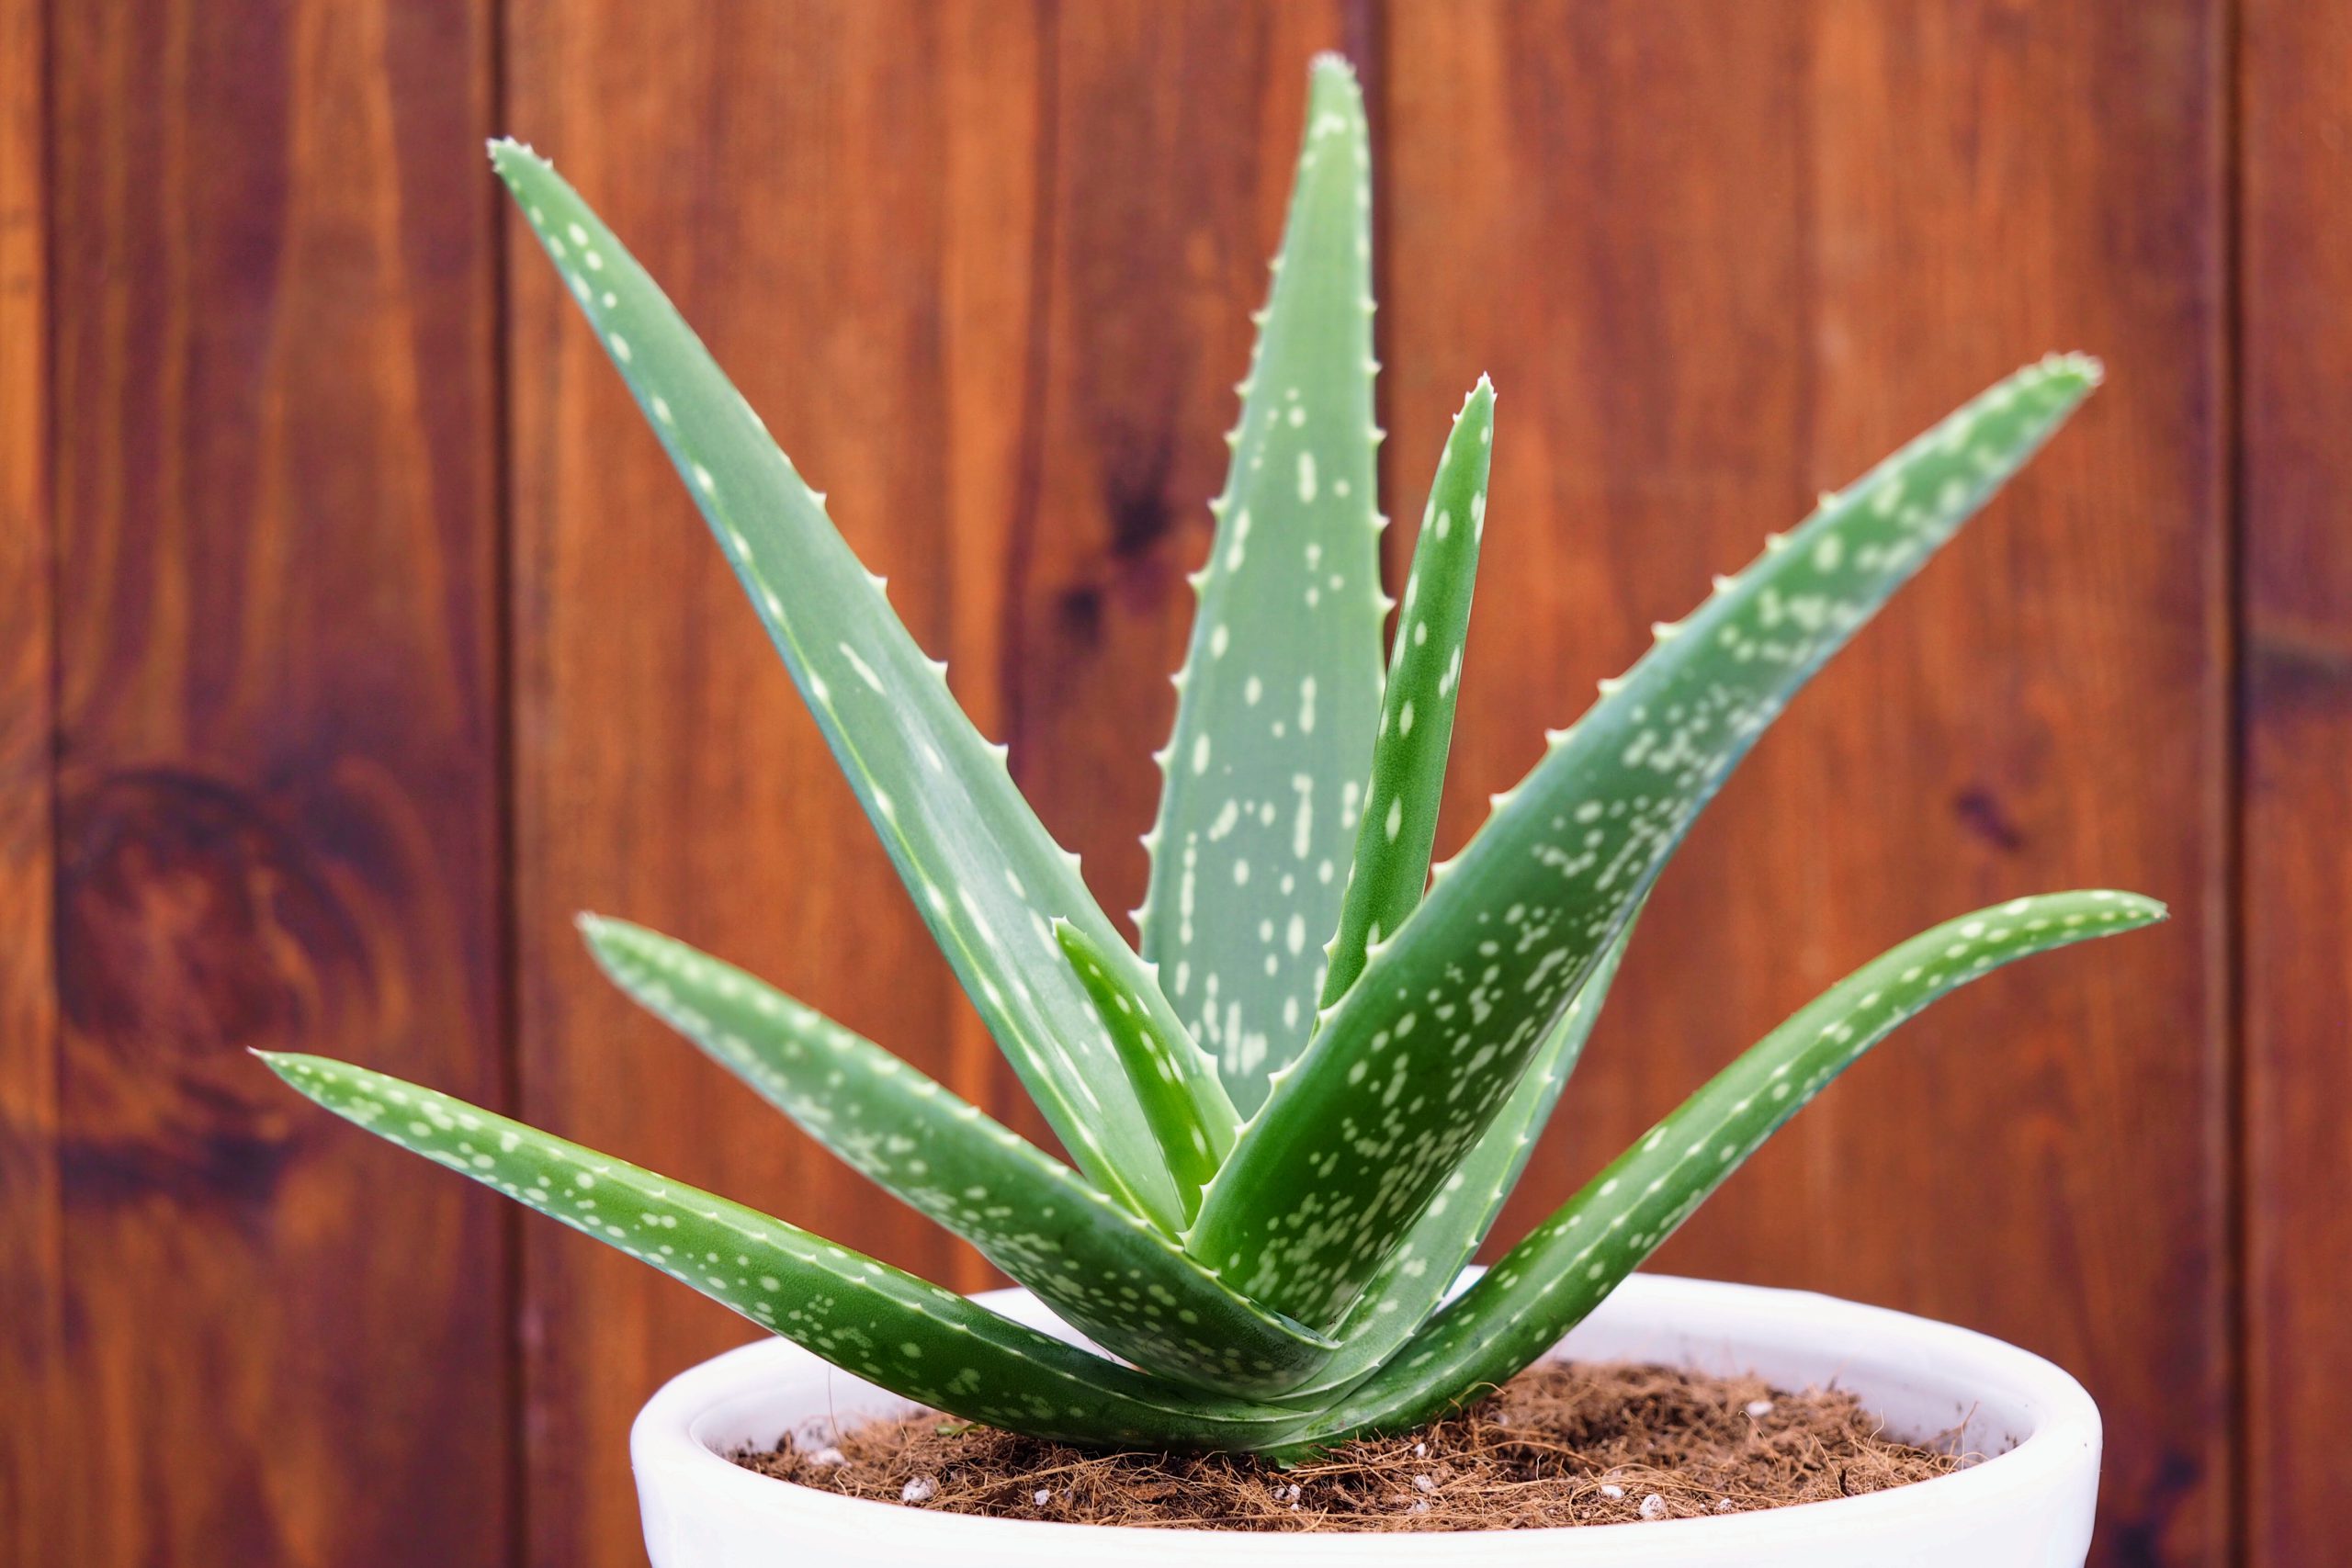 Caring for Your Aloe vera Plant